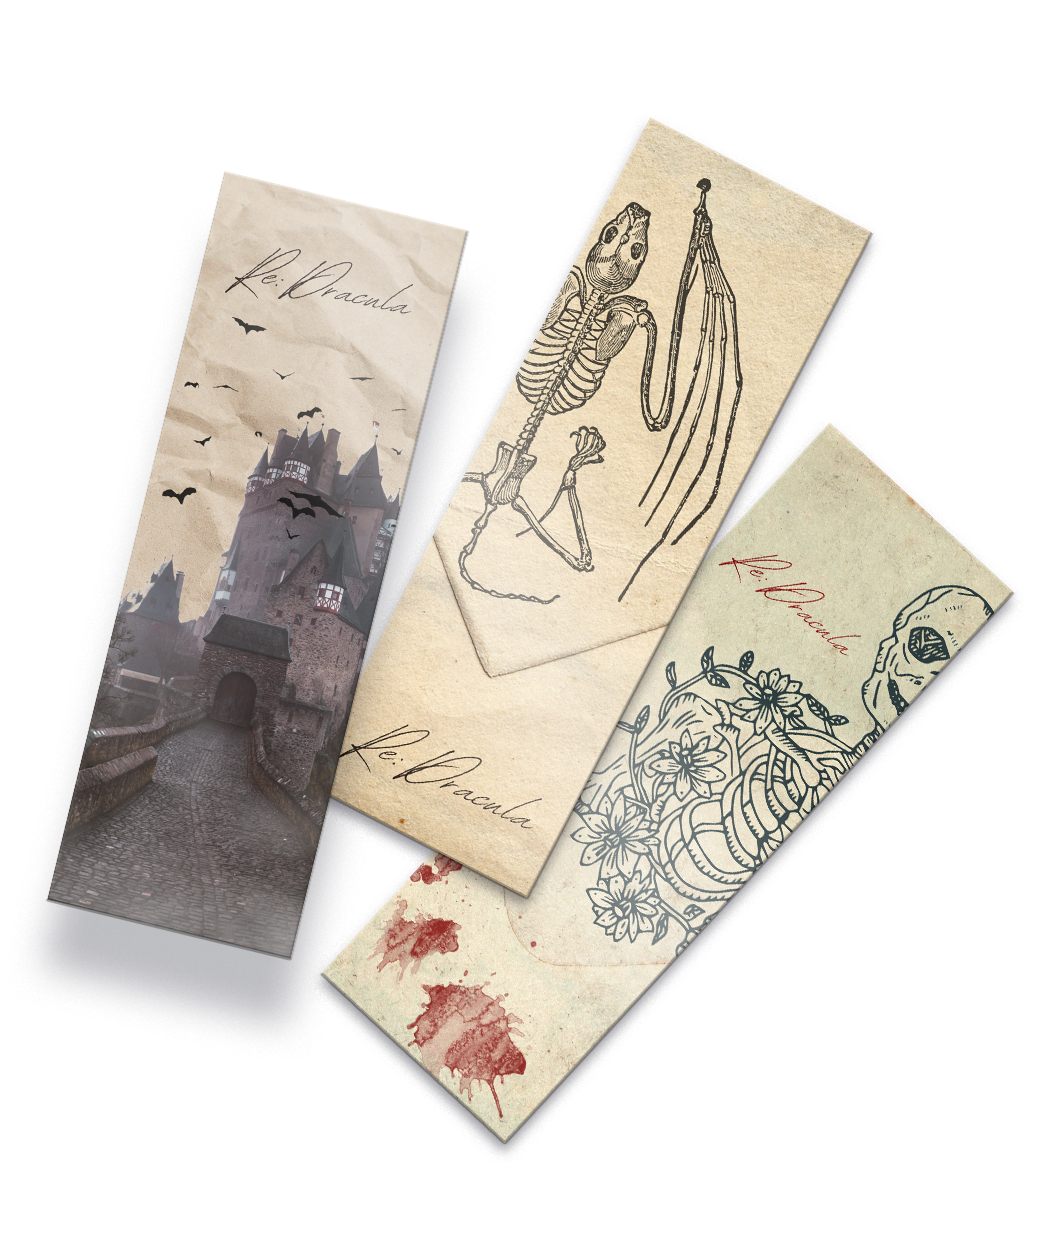 A set of three bookmarks with different illustrations, one of a spooky building with bats with text that reads 